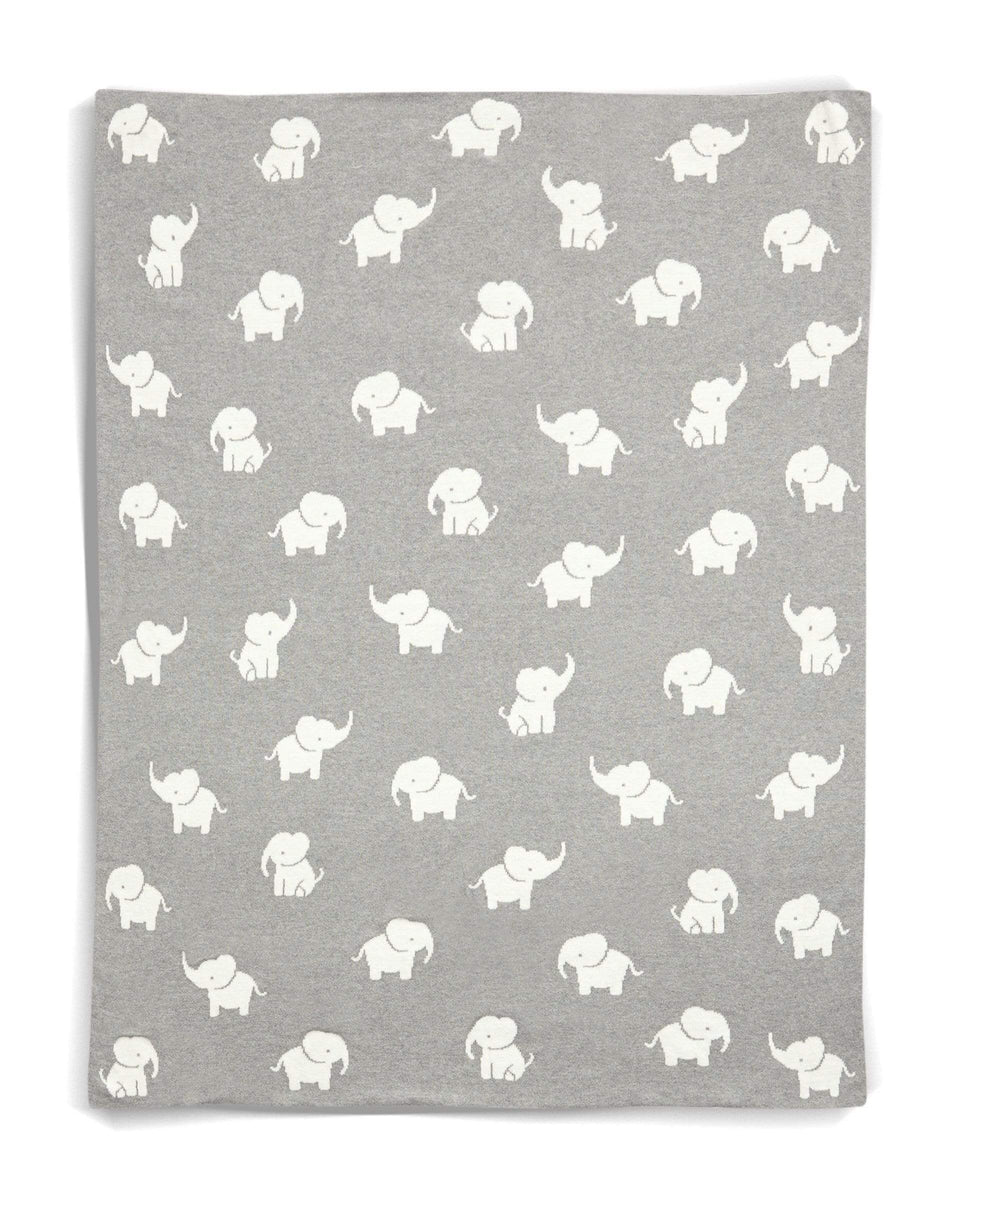 Mamas & Papas Blankets Welcome To The World Knitted Elephant Blanket - Grey